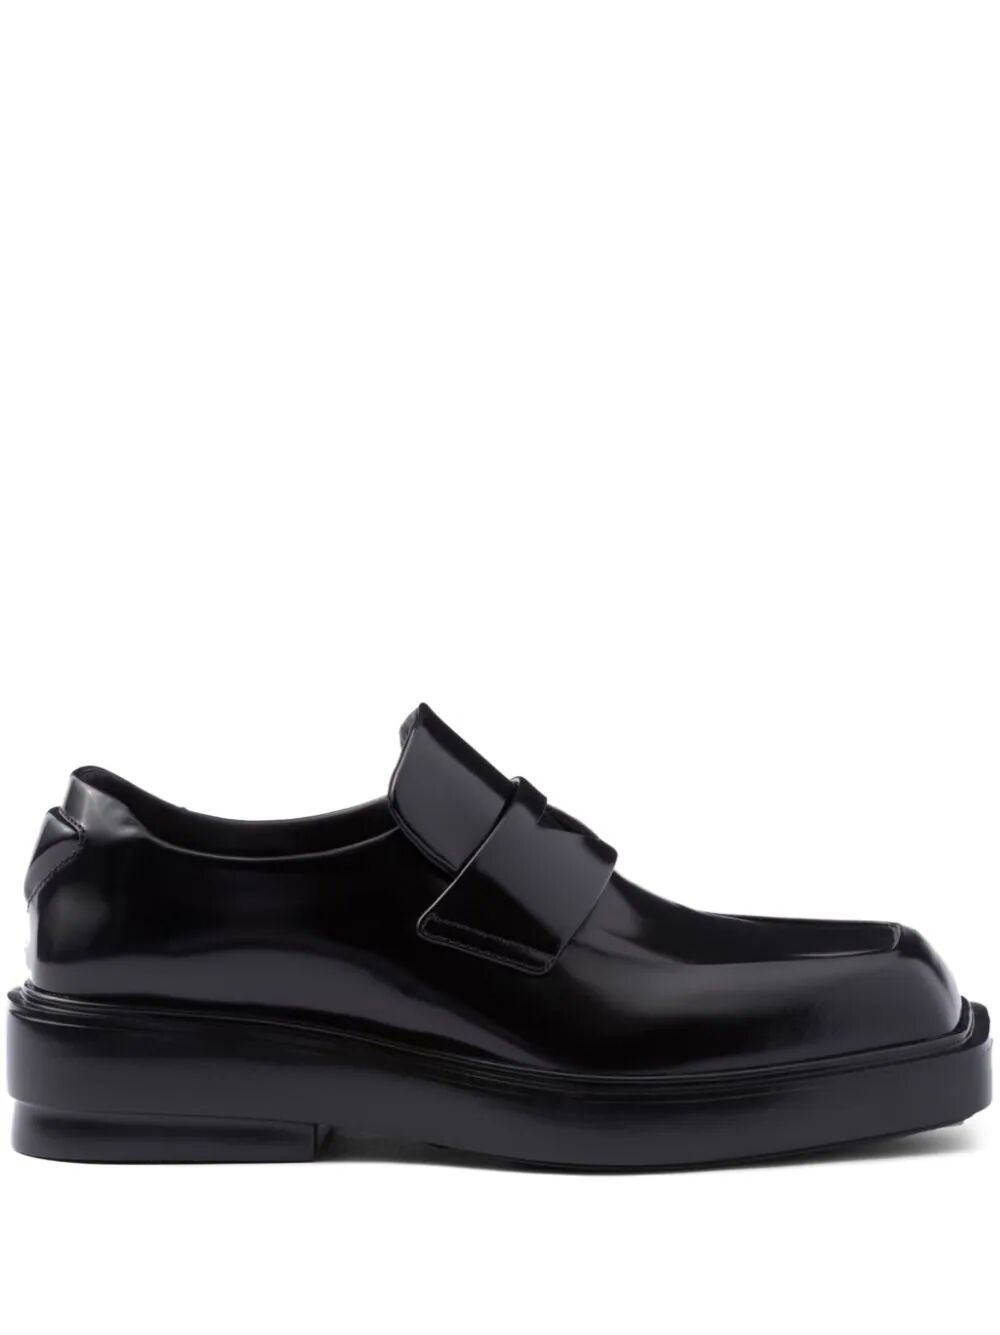 PRADA FENDER SQUARE LEATHER LOAFERS - 13